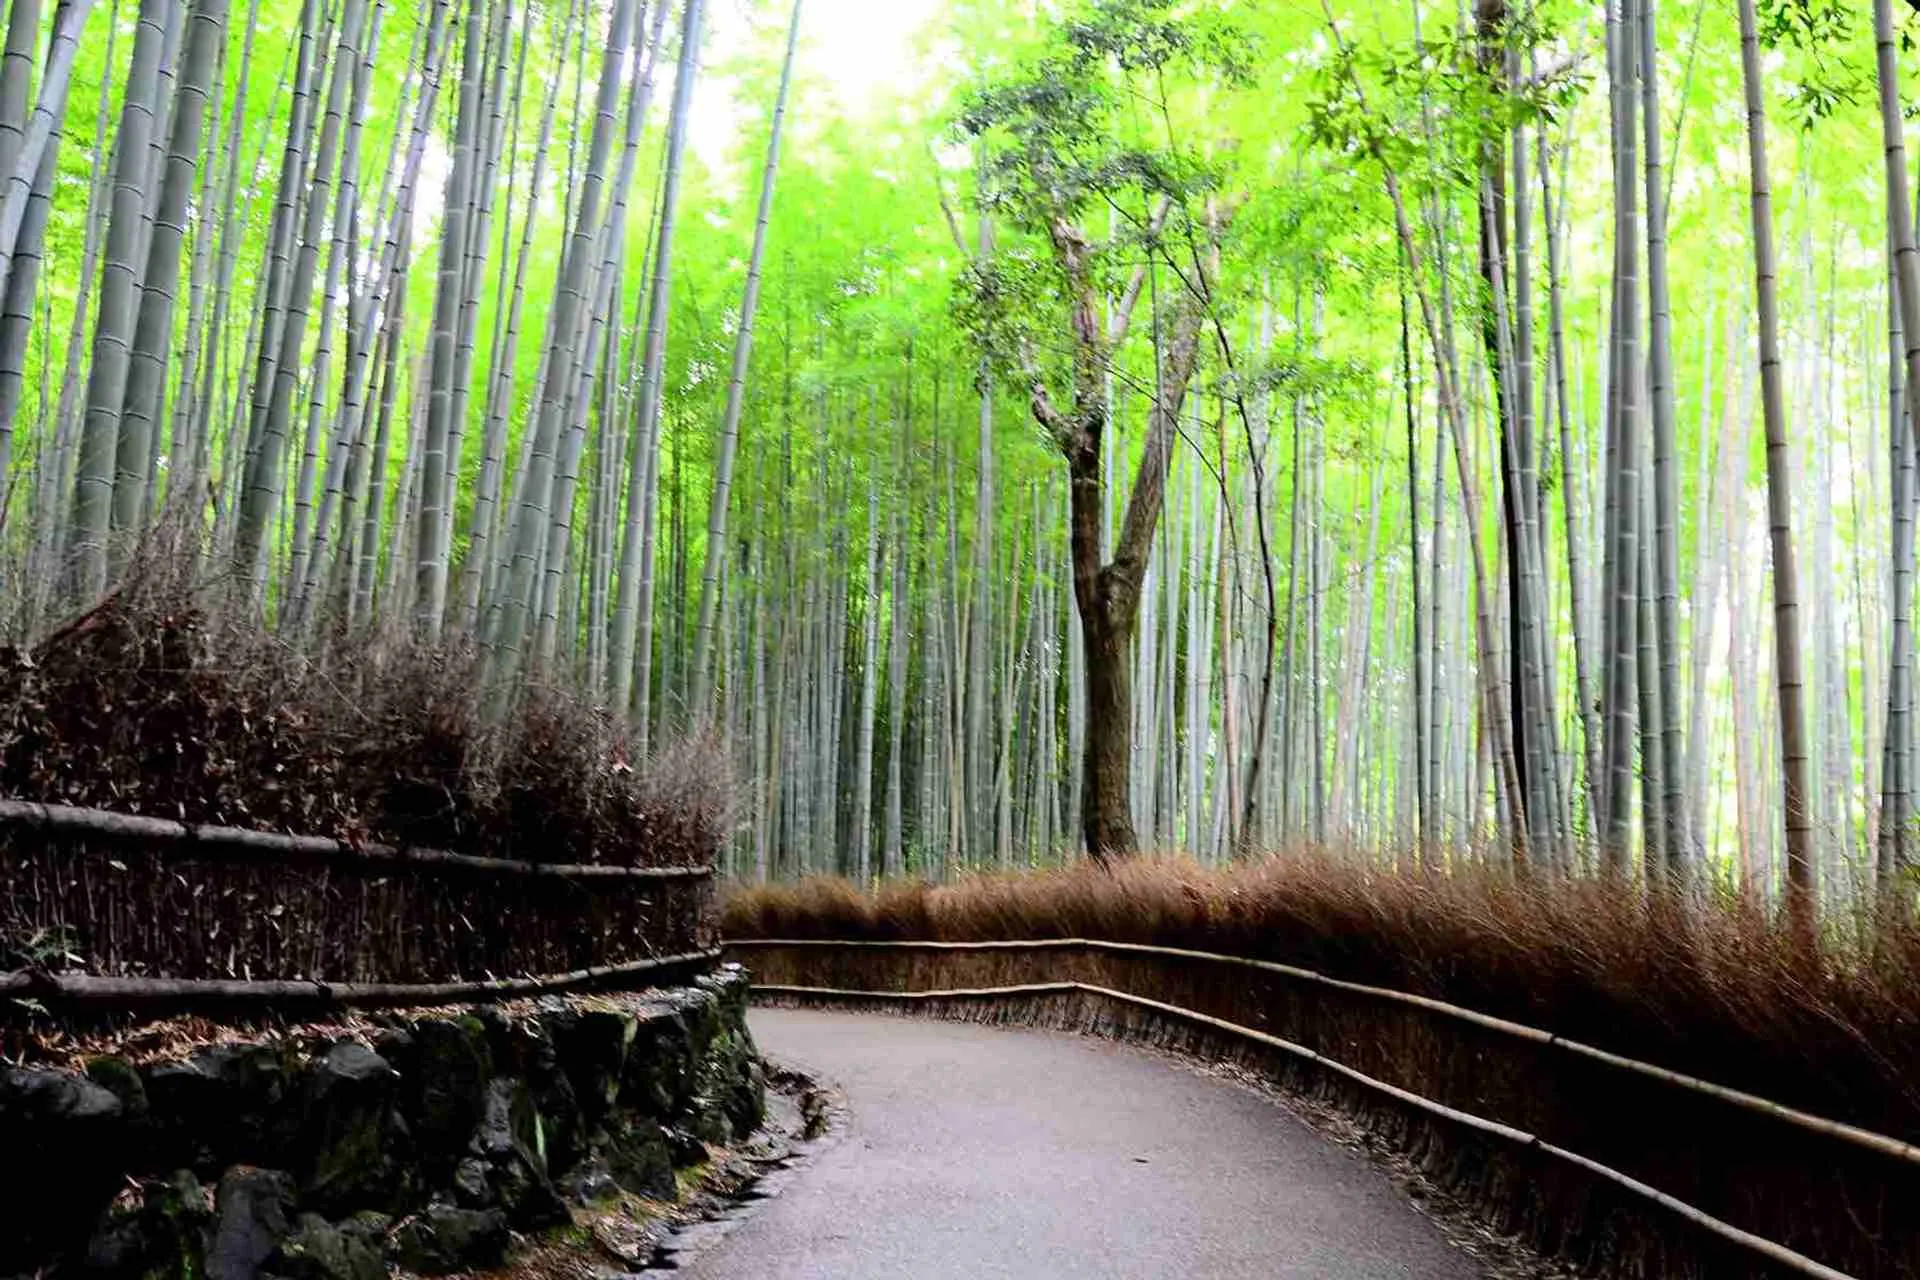 Bamboo Forest in Japan